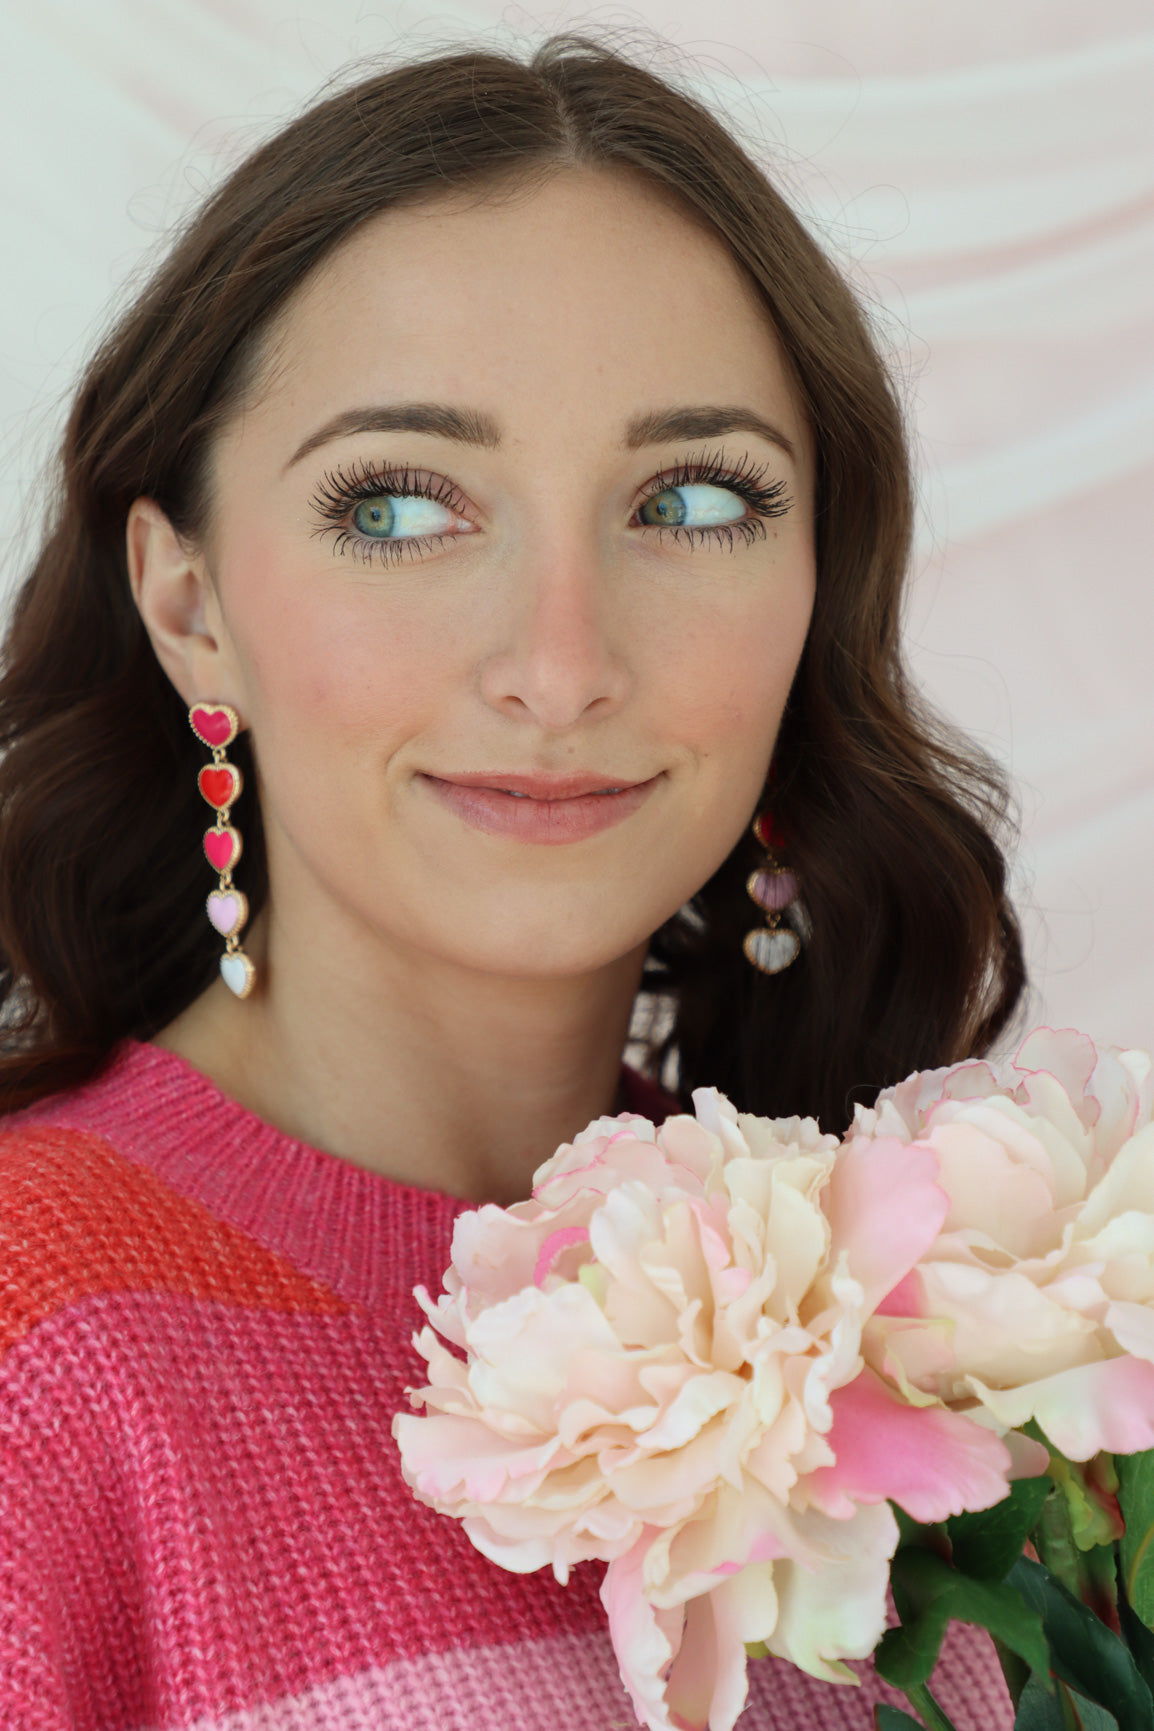 girl wearing red, pink, and white heart shaped drop earrings